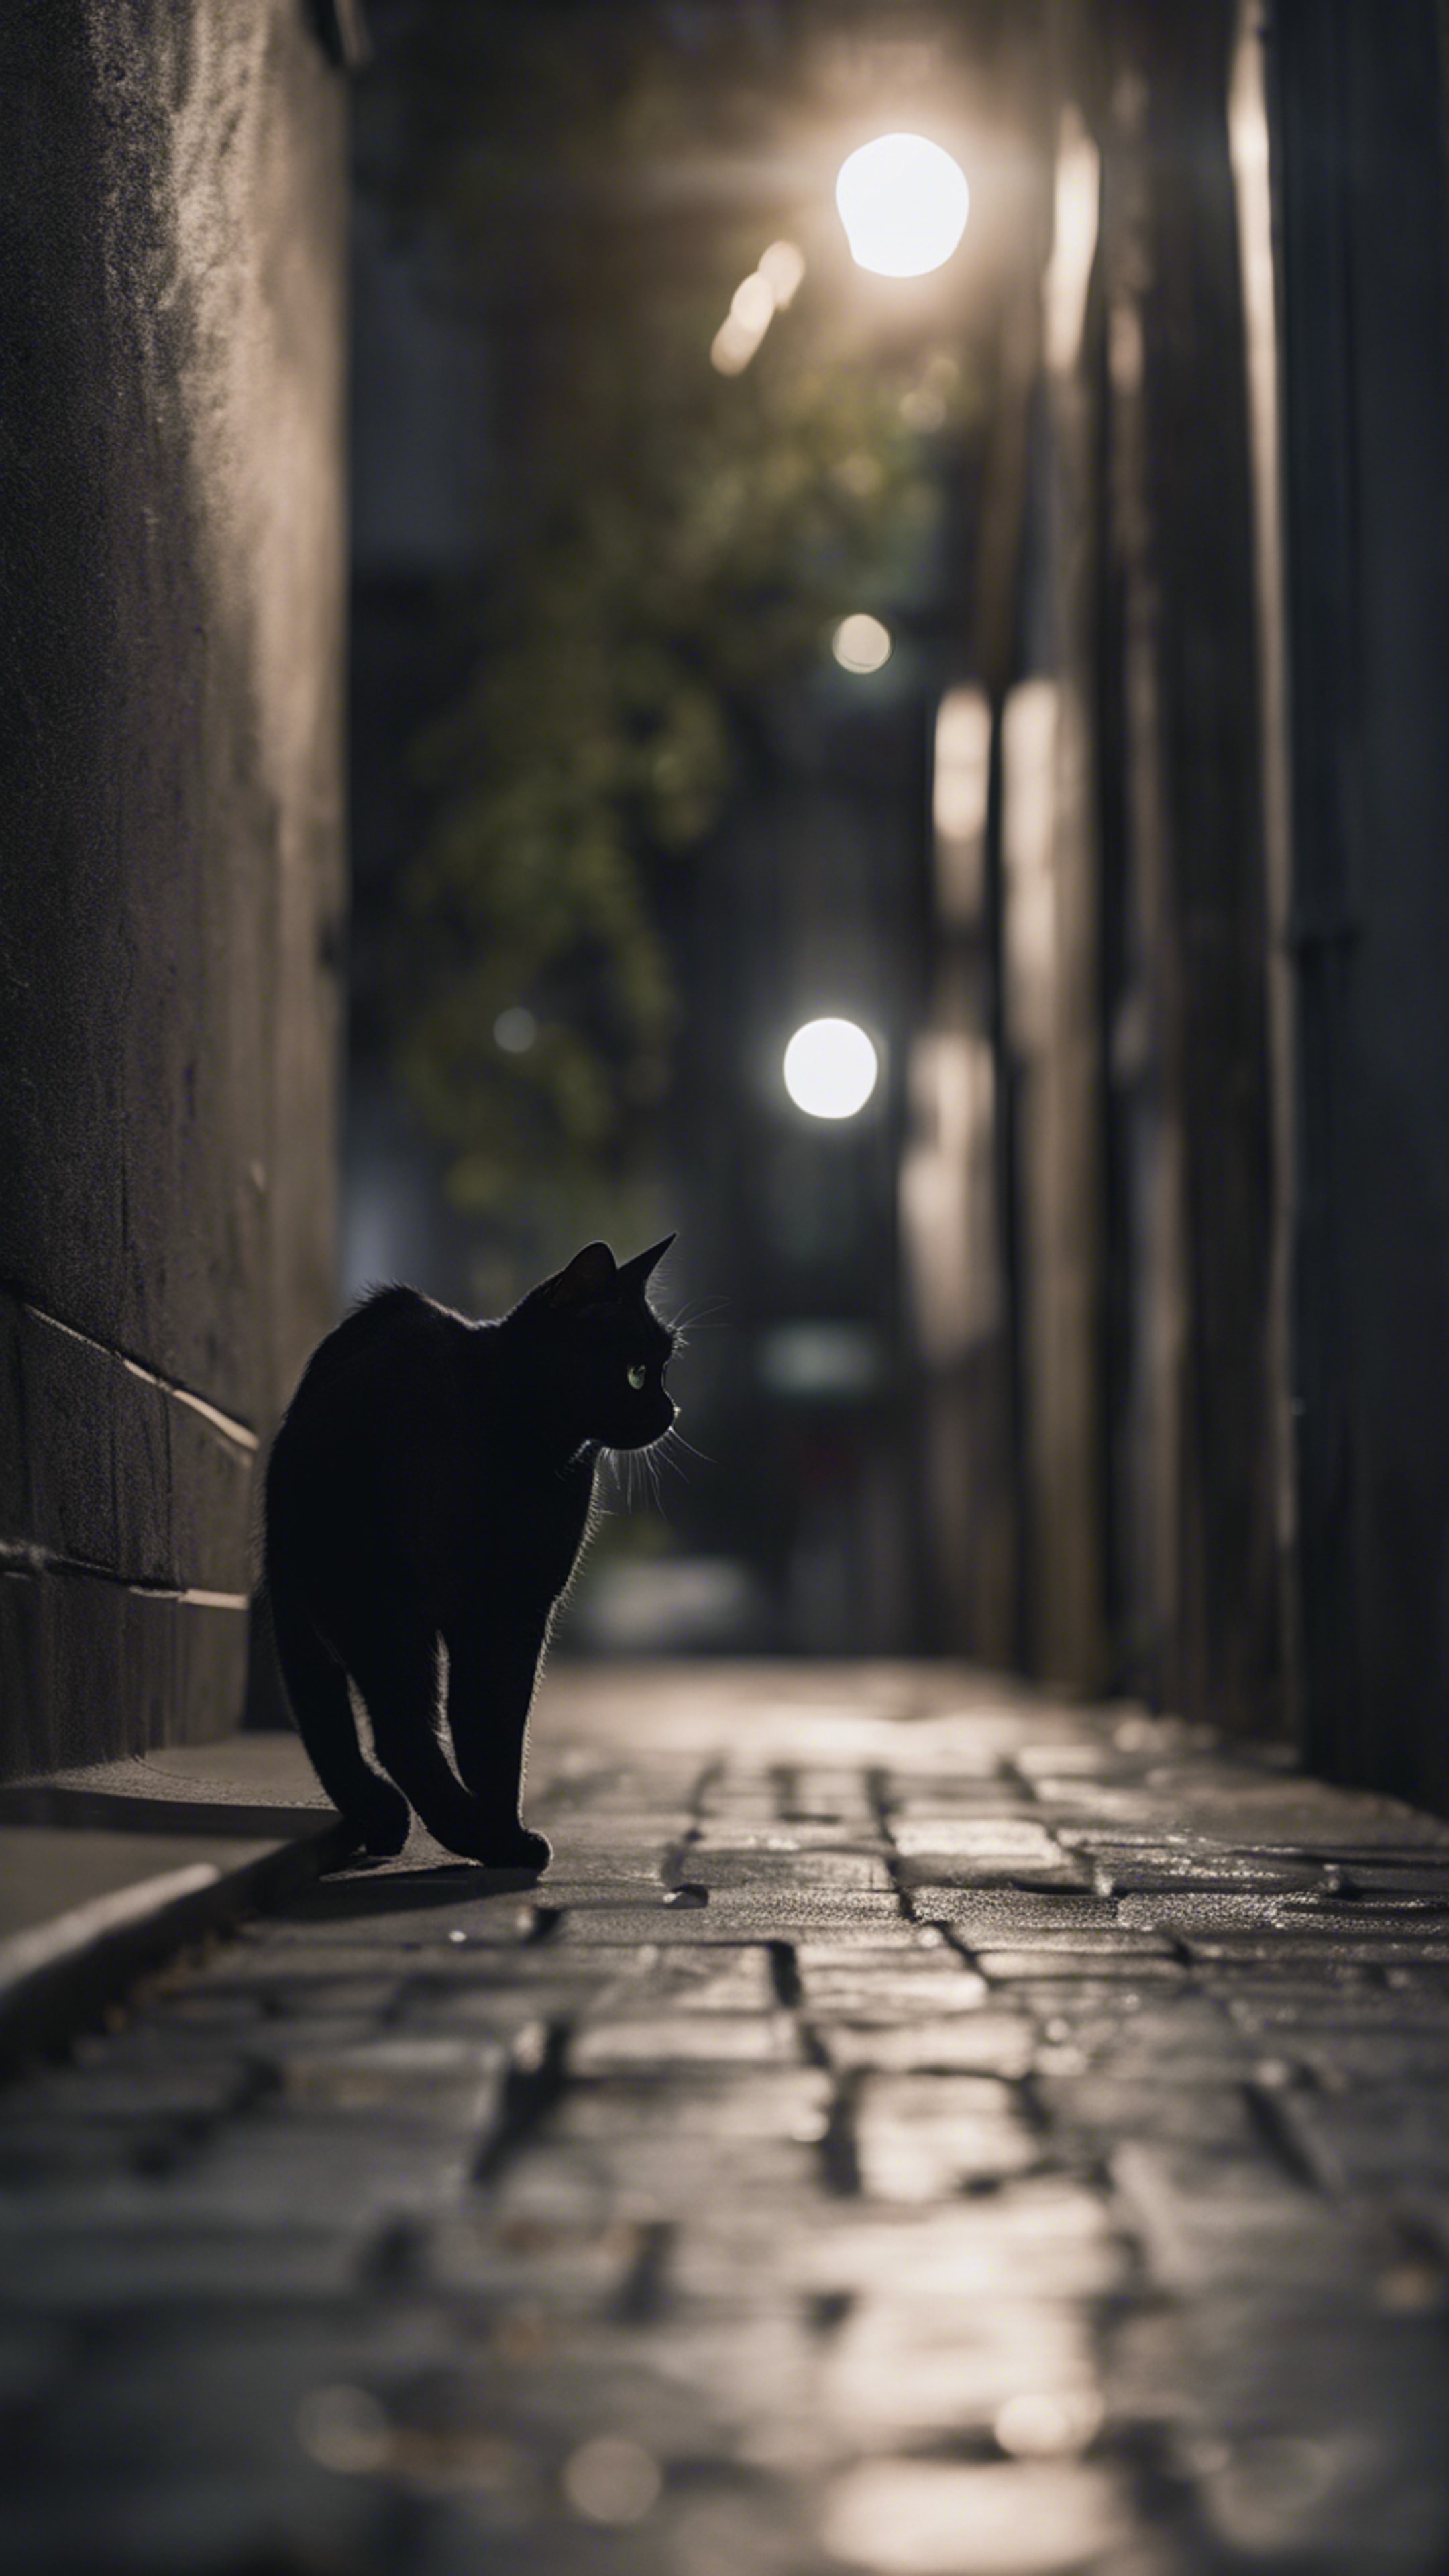 A black cat hiding in the gray shadows of a city alleyway at midnight. 벽지[bd319e741e3b49d892dc]